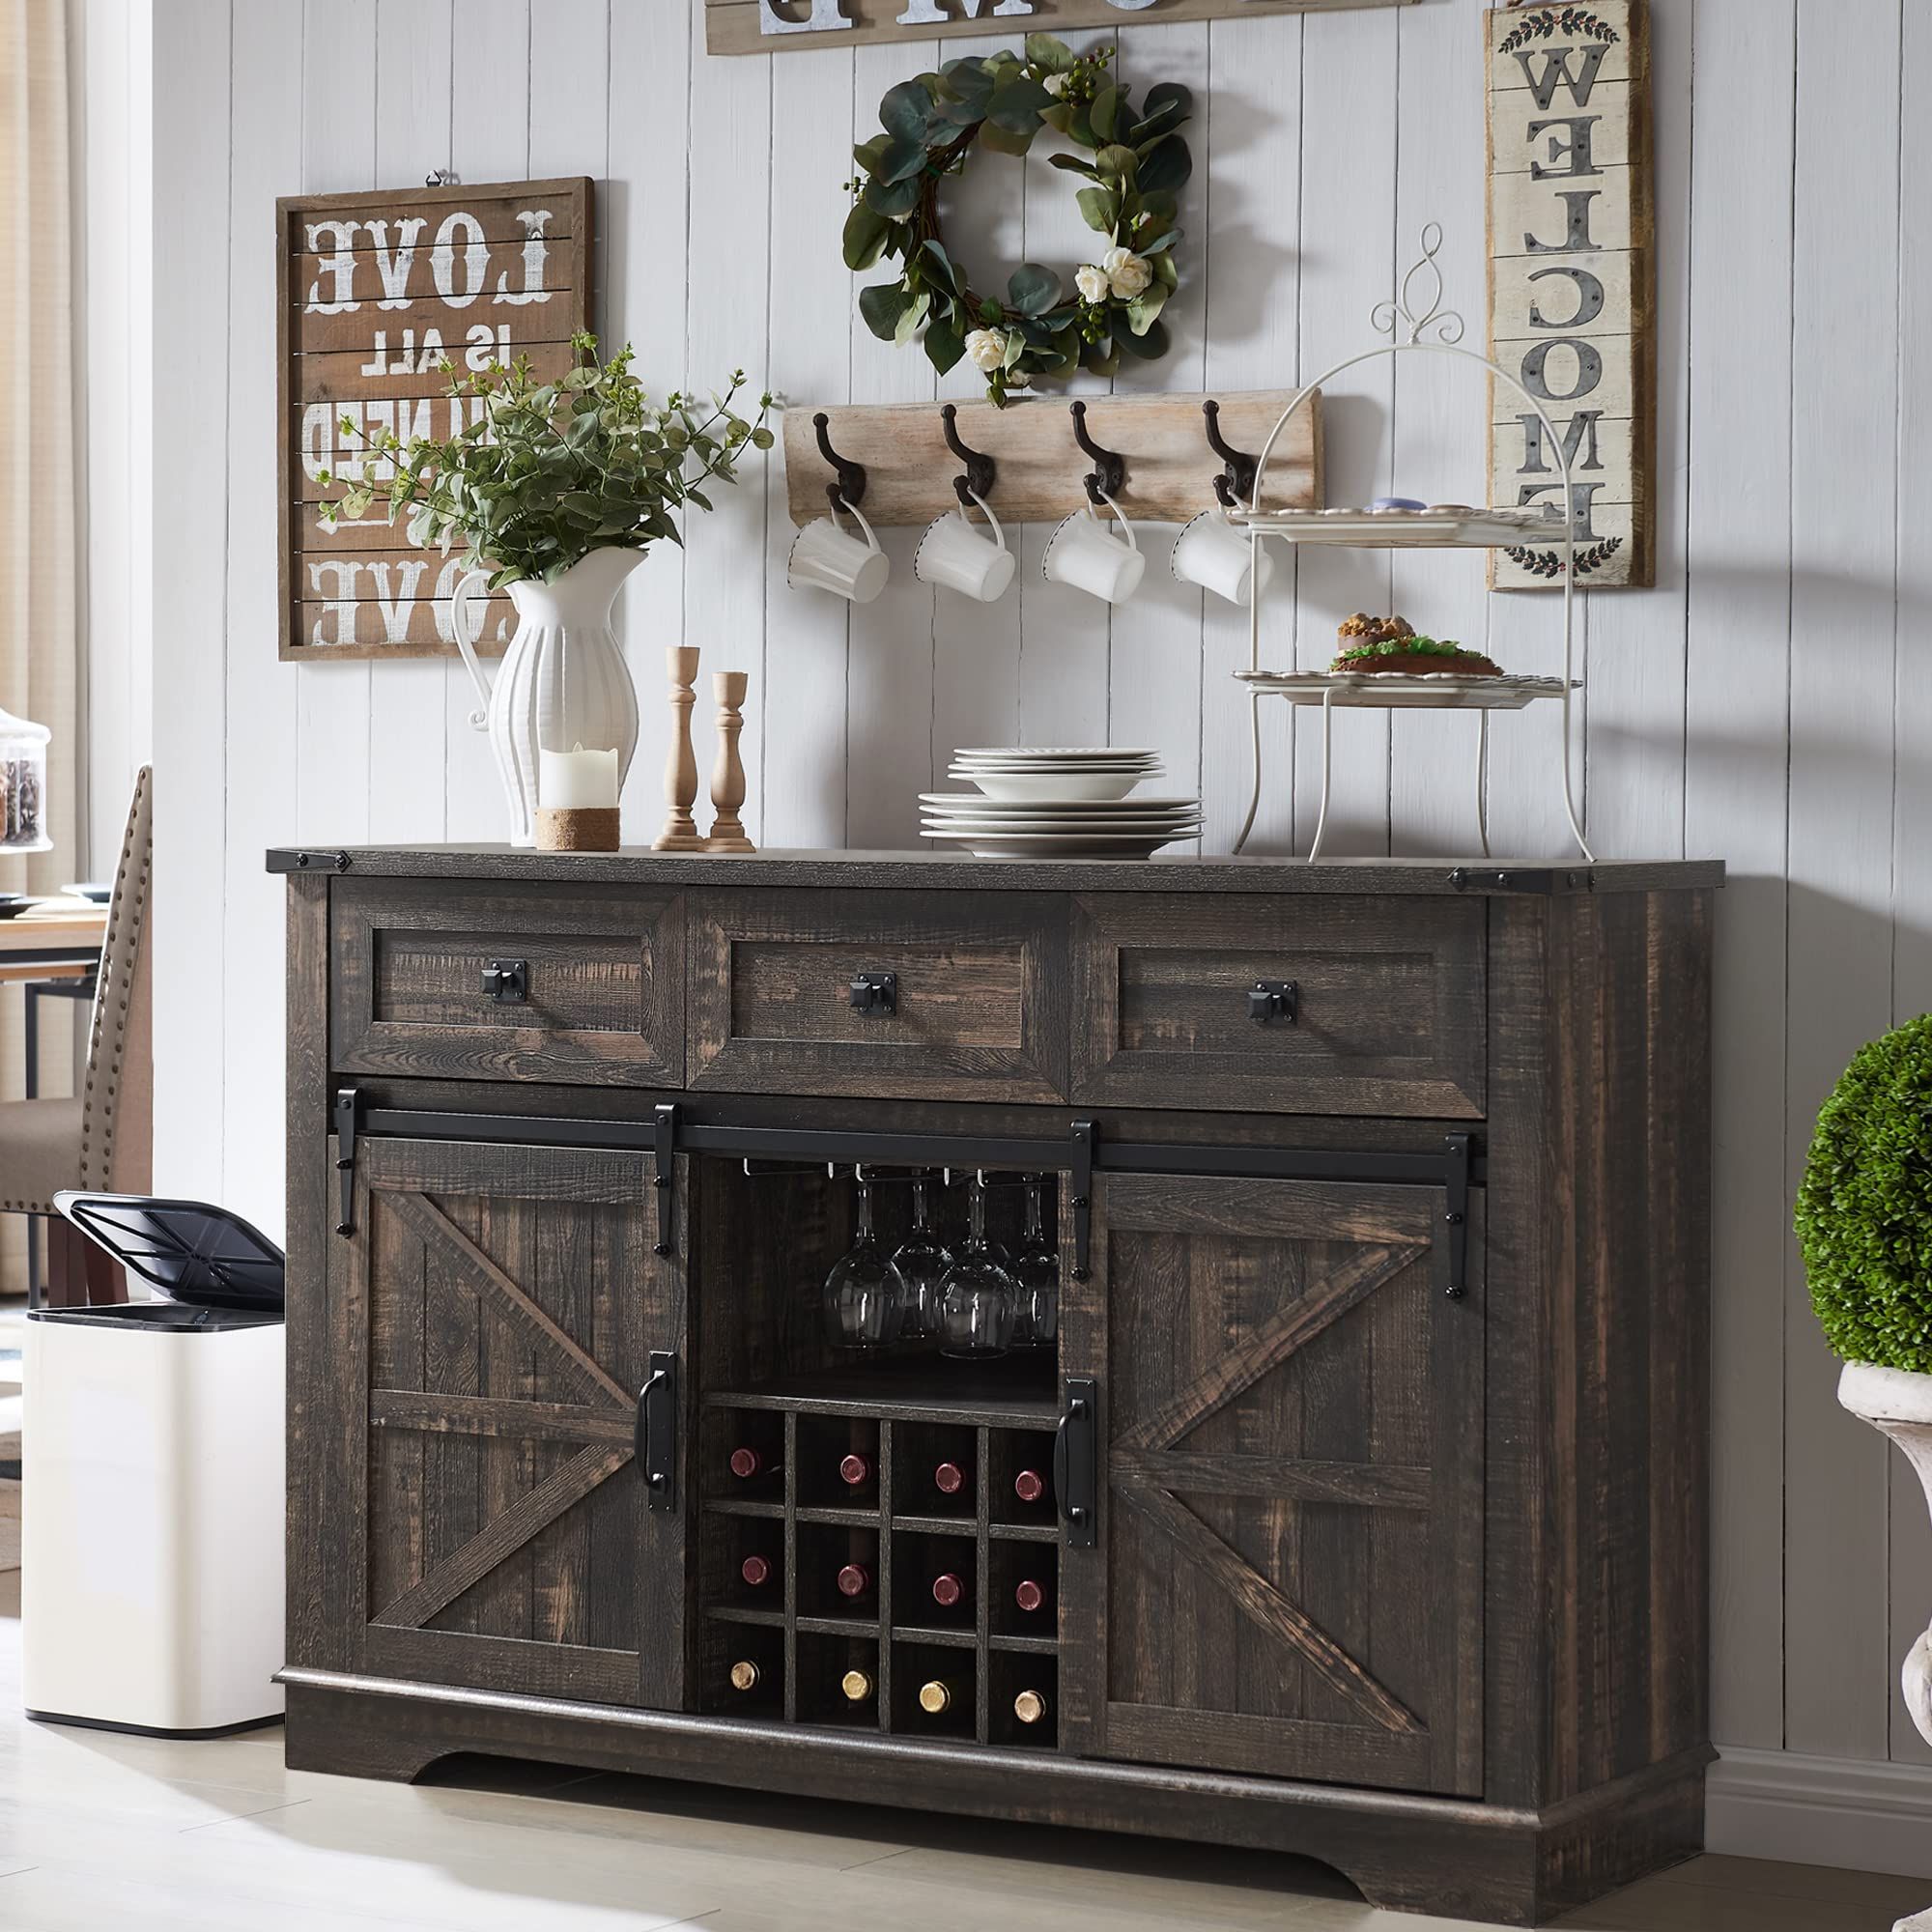 Trendy Sideboards Double Barn Door Buffet For Amazon: Okd Farmhouse Buffet Cabinet With Storage, 54" Sideboard With 3  Drawers, Sliding Barn Door, Wine And Glass Rack, Storage Shelves, Liquor  Coffee Bar Cupboard For Kitchen, Dining Room, Dark Rustic Oak : (View 2 of 10)